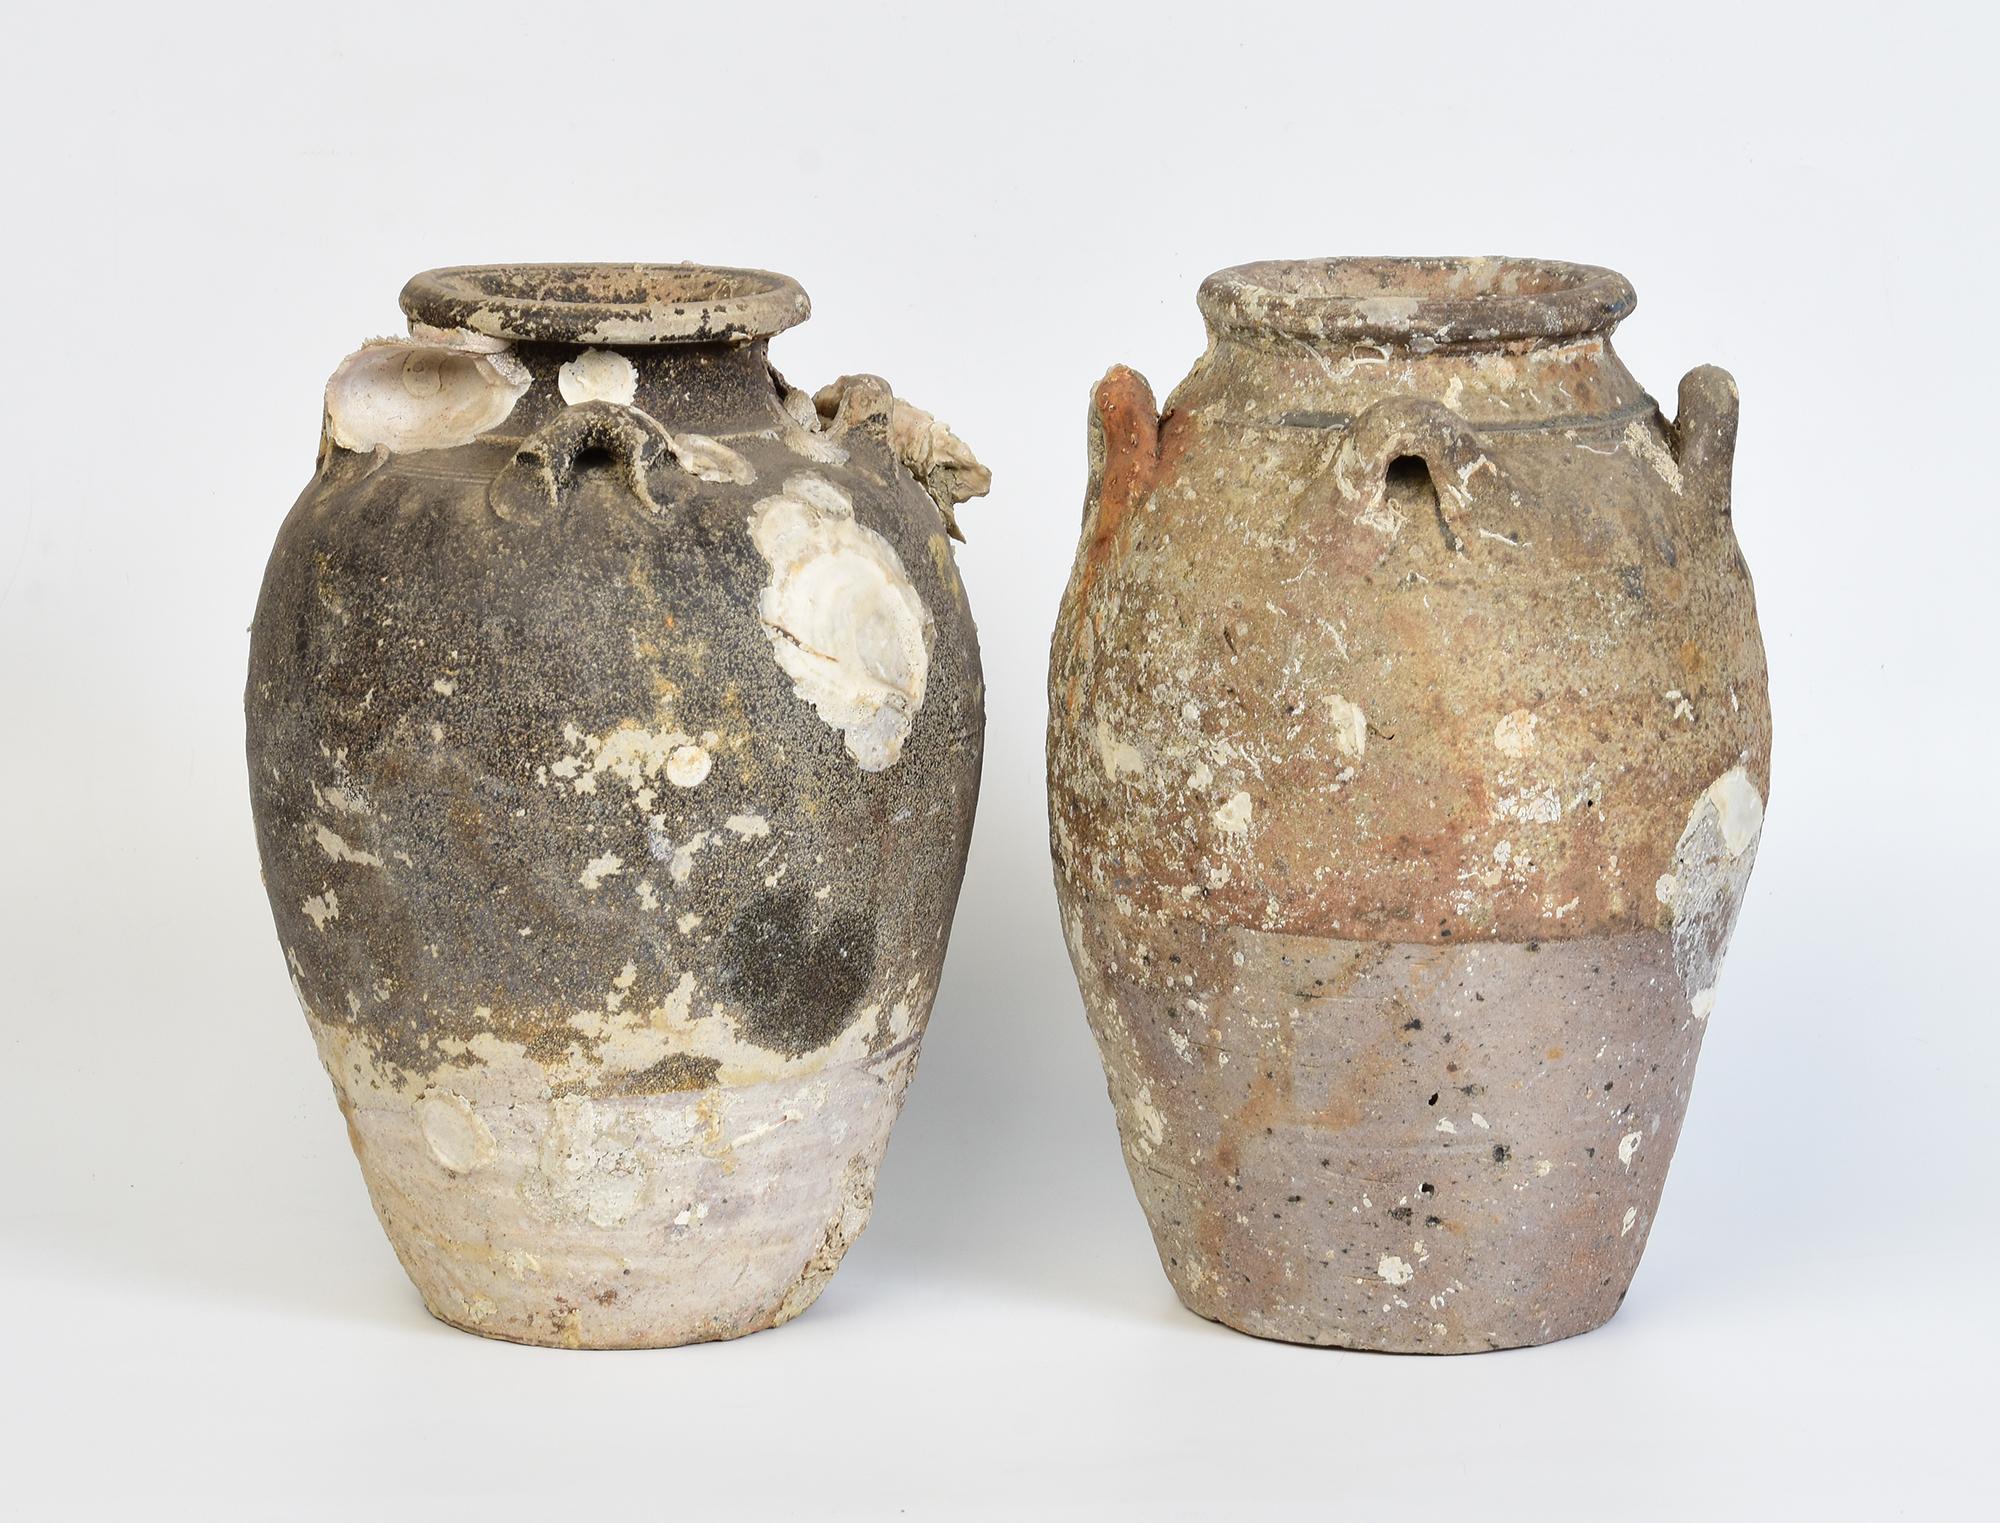 A pair of antique Sukhothai pottery jars with natural shell and barnacle from shipwreck.

Age: Thailand, Sukhothai Period, 14th - 16th Century
Size: Height 26.5 - 26.9 C.M. / Width 19 - 19.2 C.M.
Condition: Nice condition overall (some expected